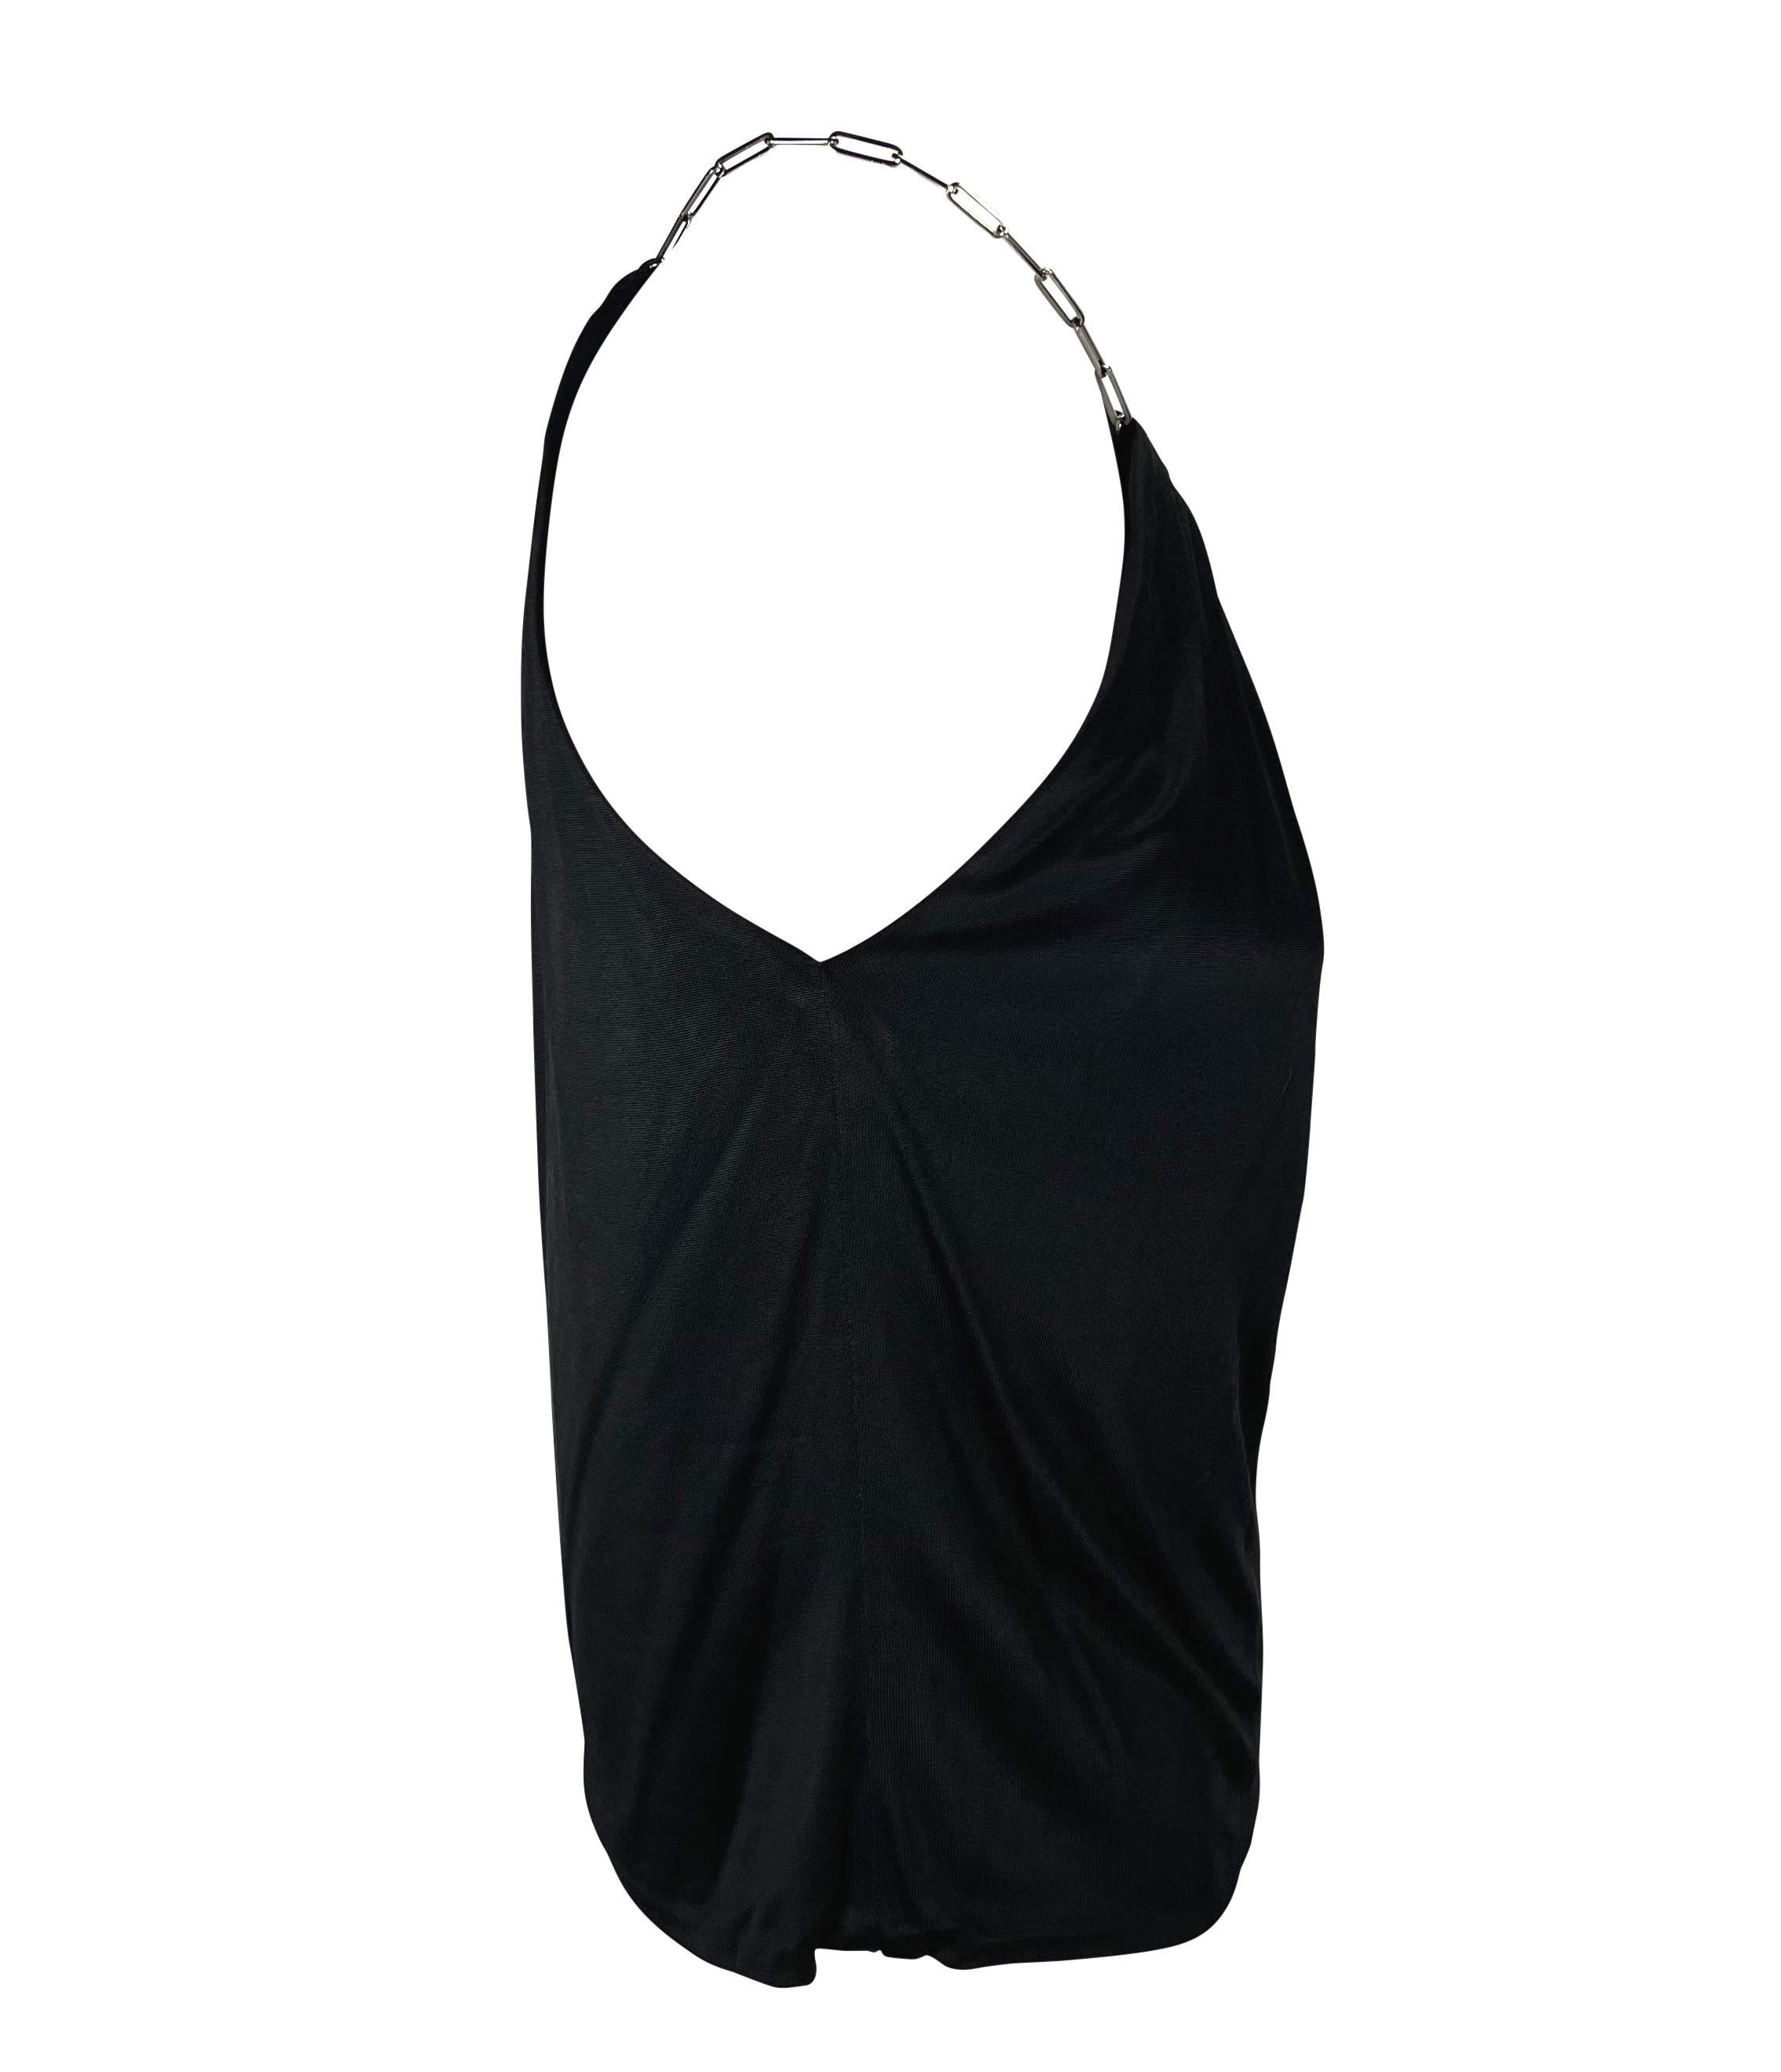 Women's S/S 2000 Gucci by Tom Ford Chain Link Black Viscose Plunge Tank Top For Sale